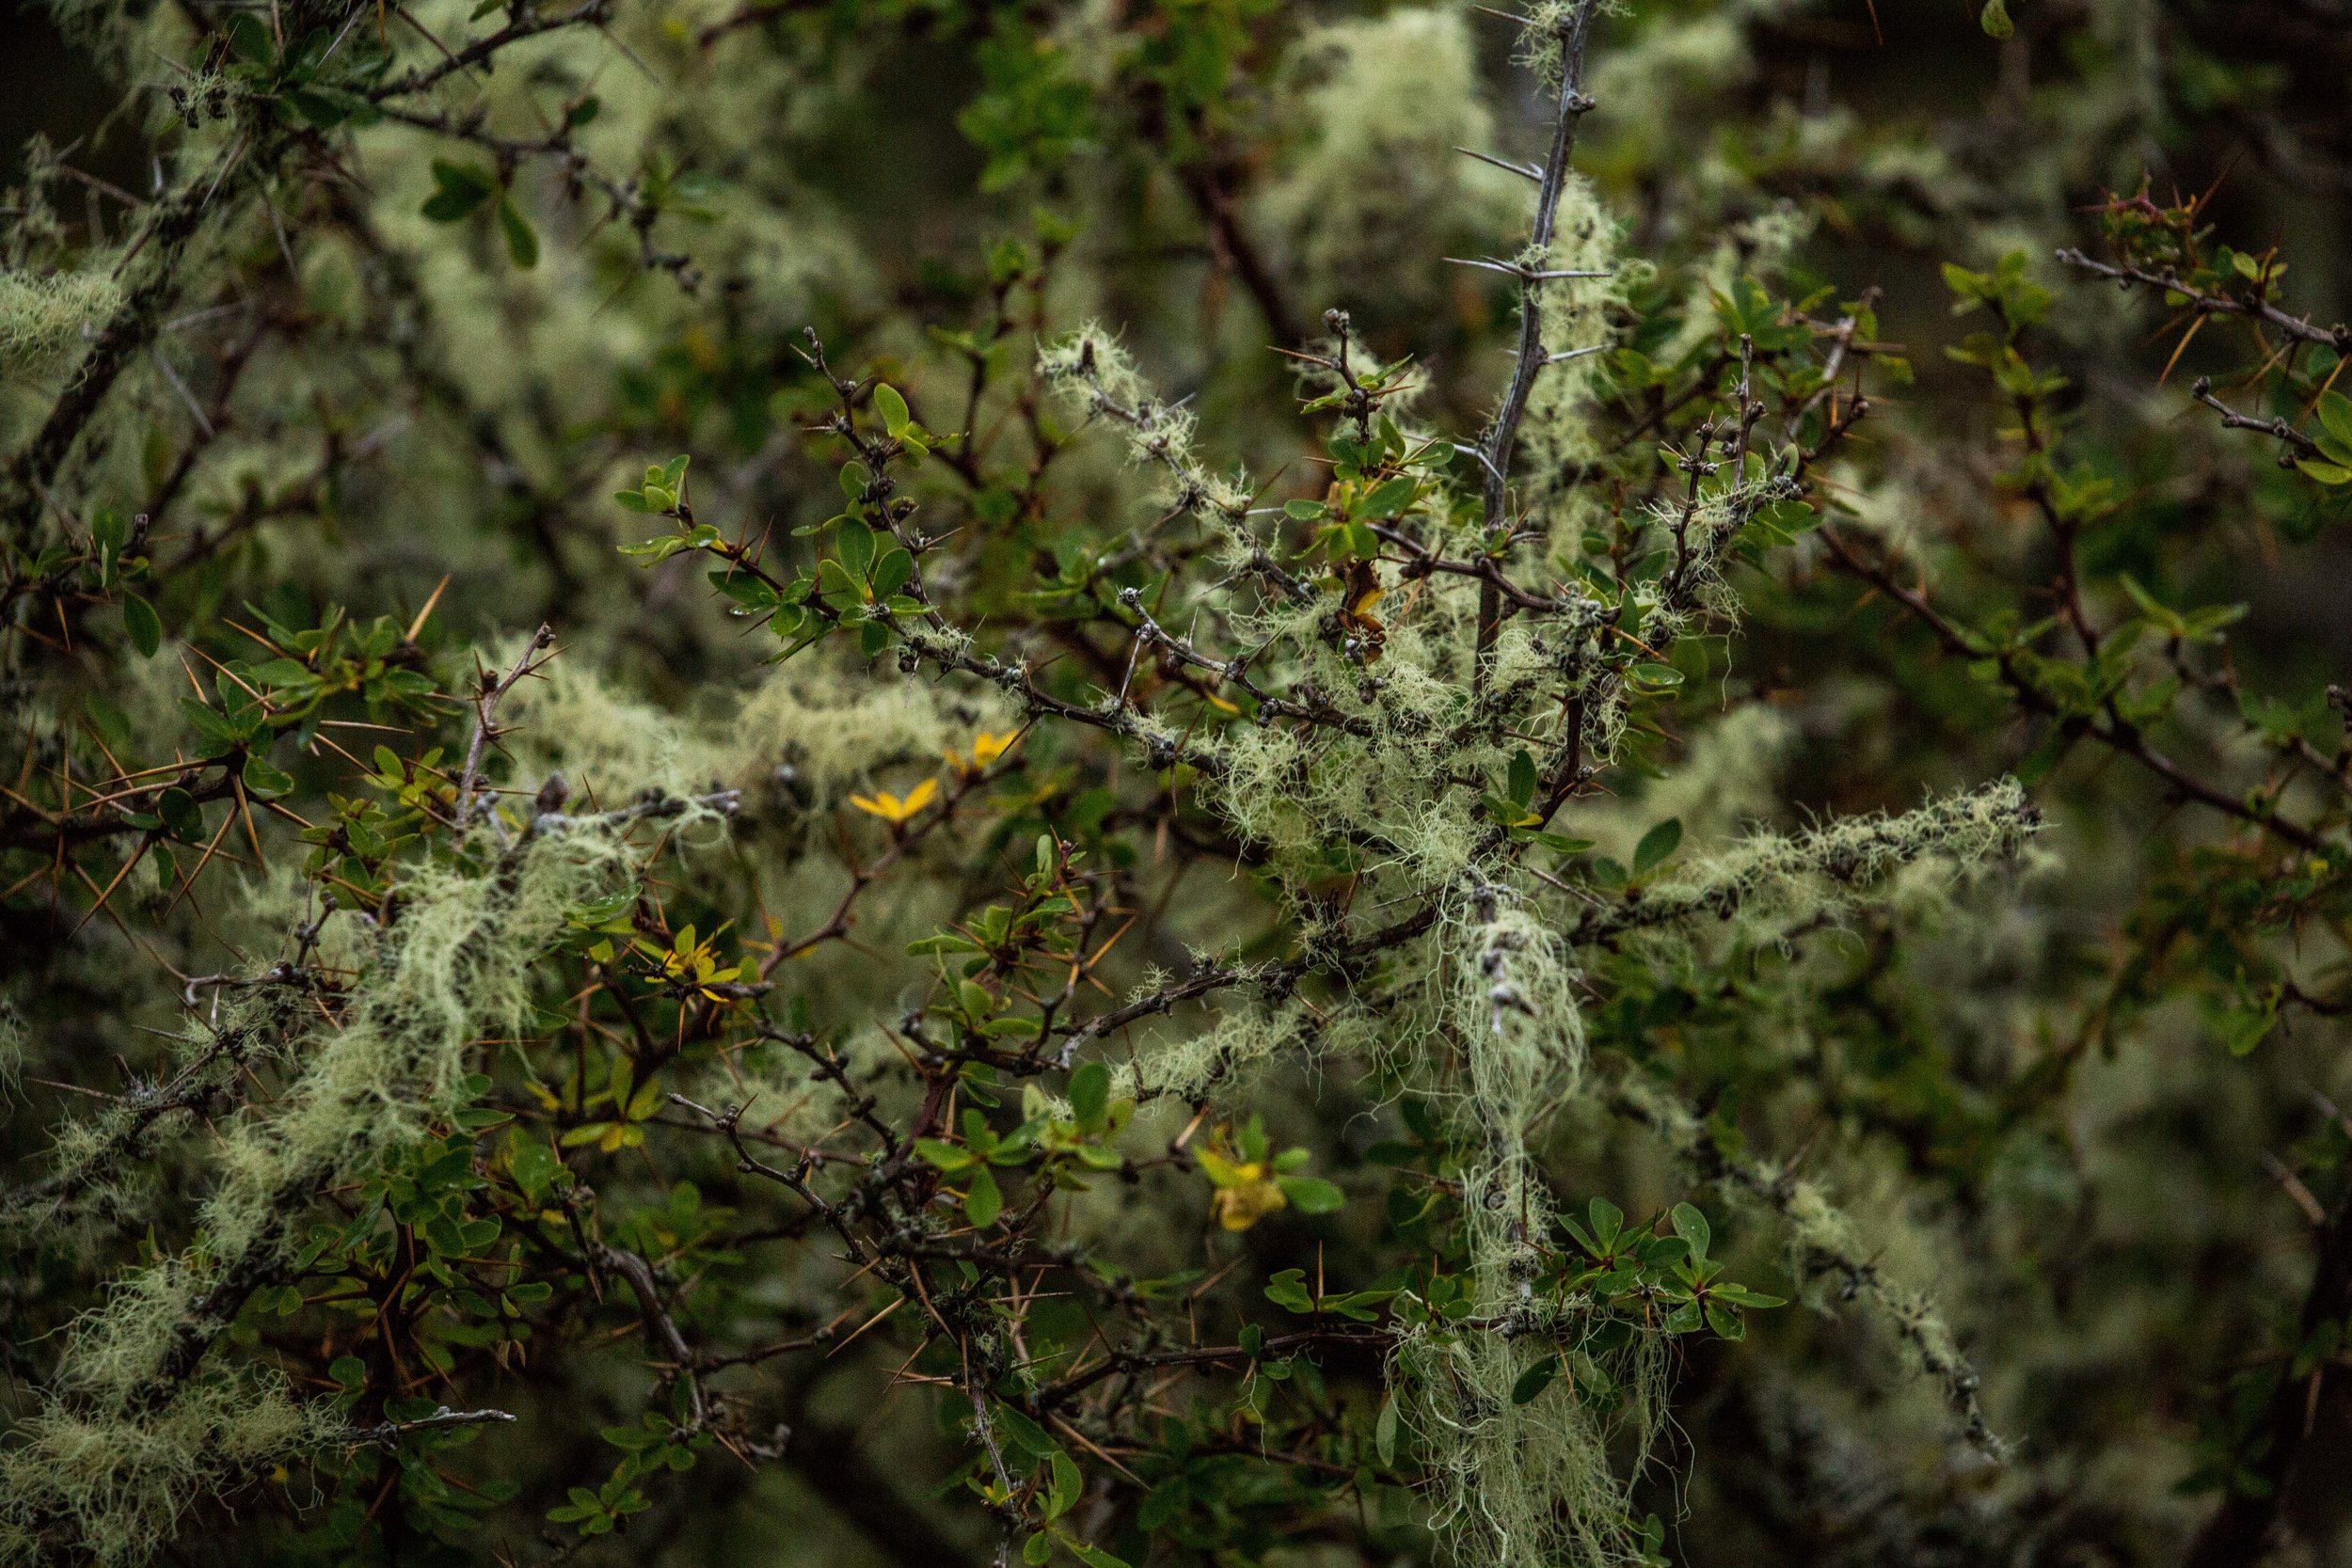 A "calafate" berry bush covered in moss.